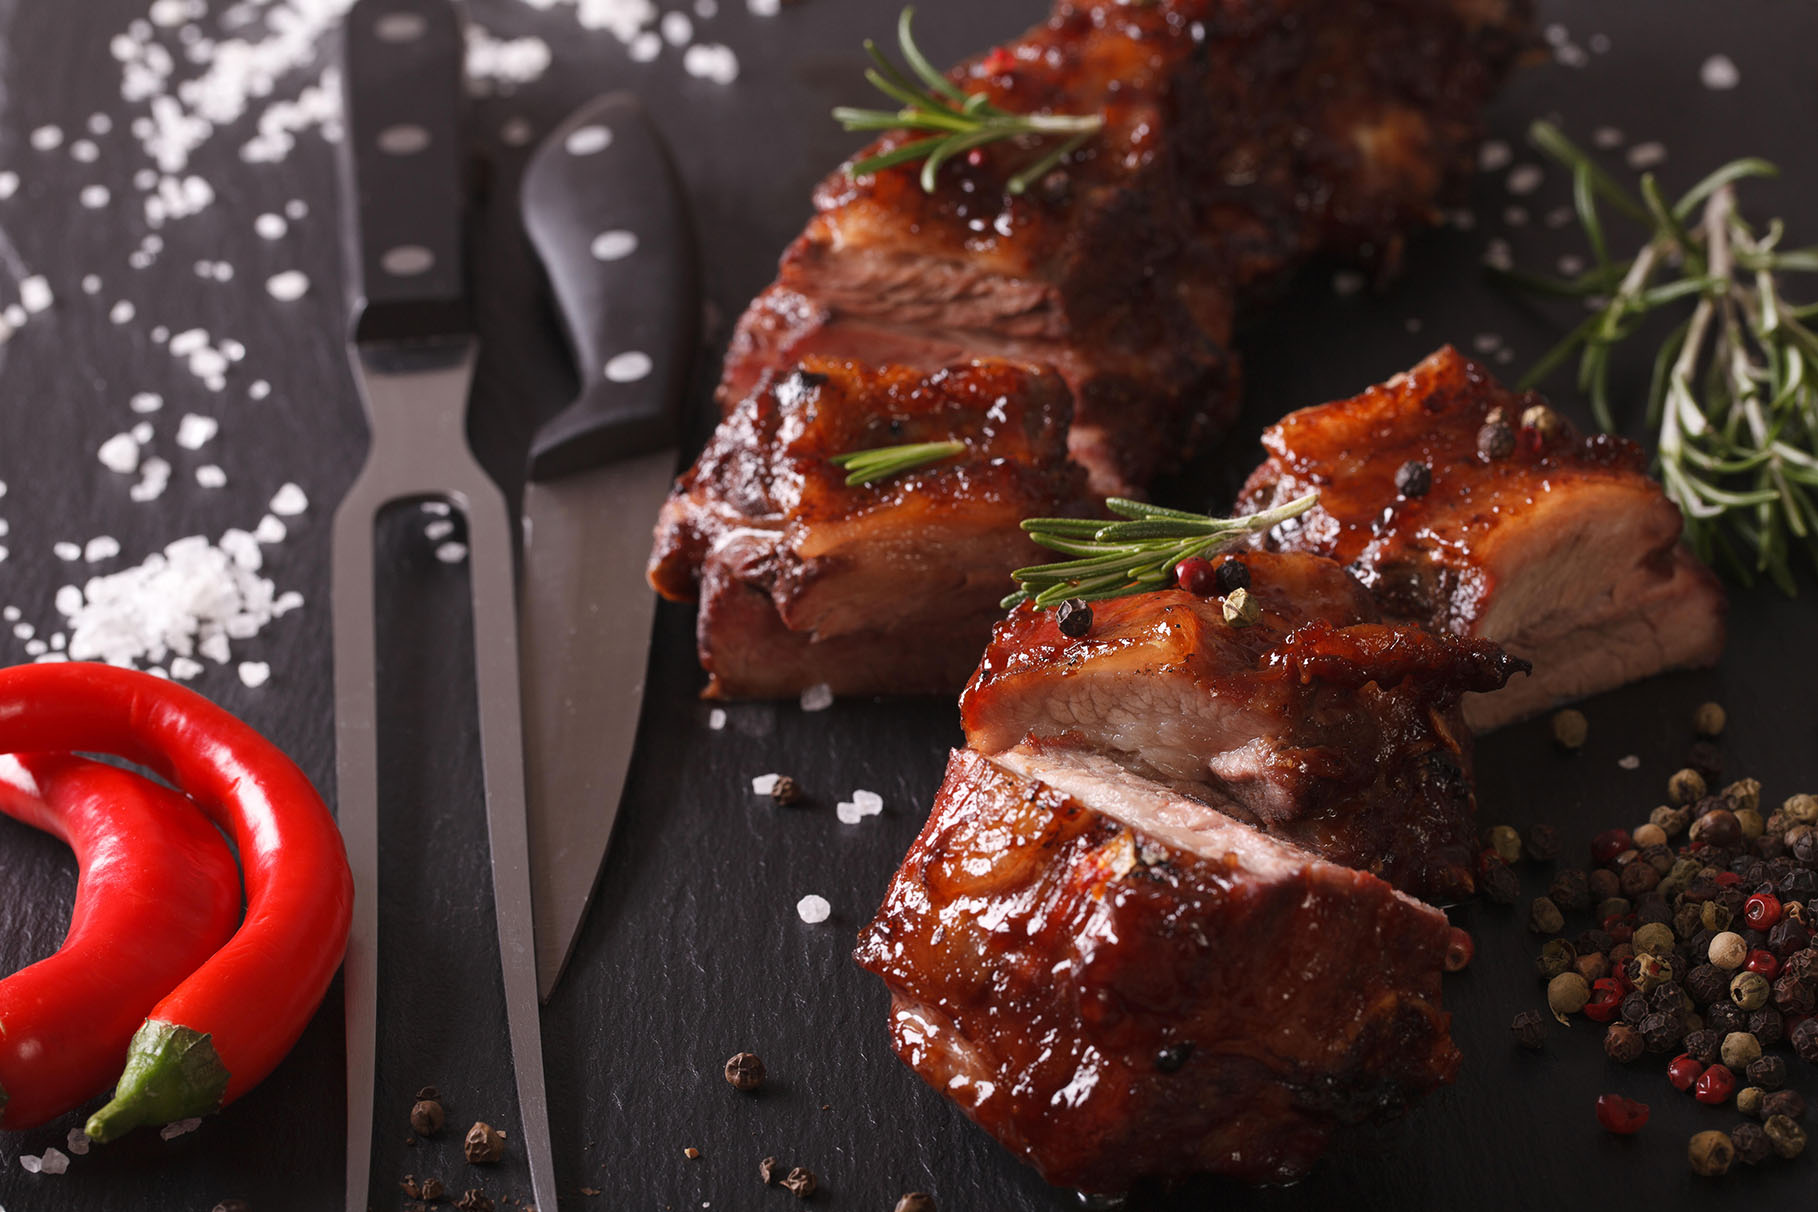 Salt and pepper spare ribs recipe image